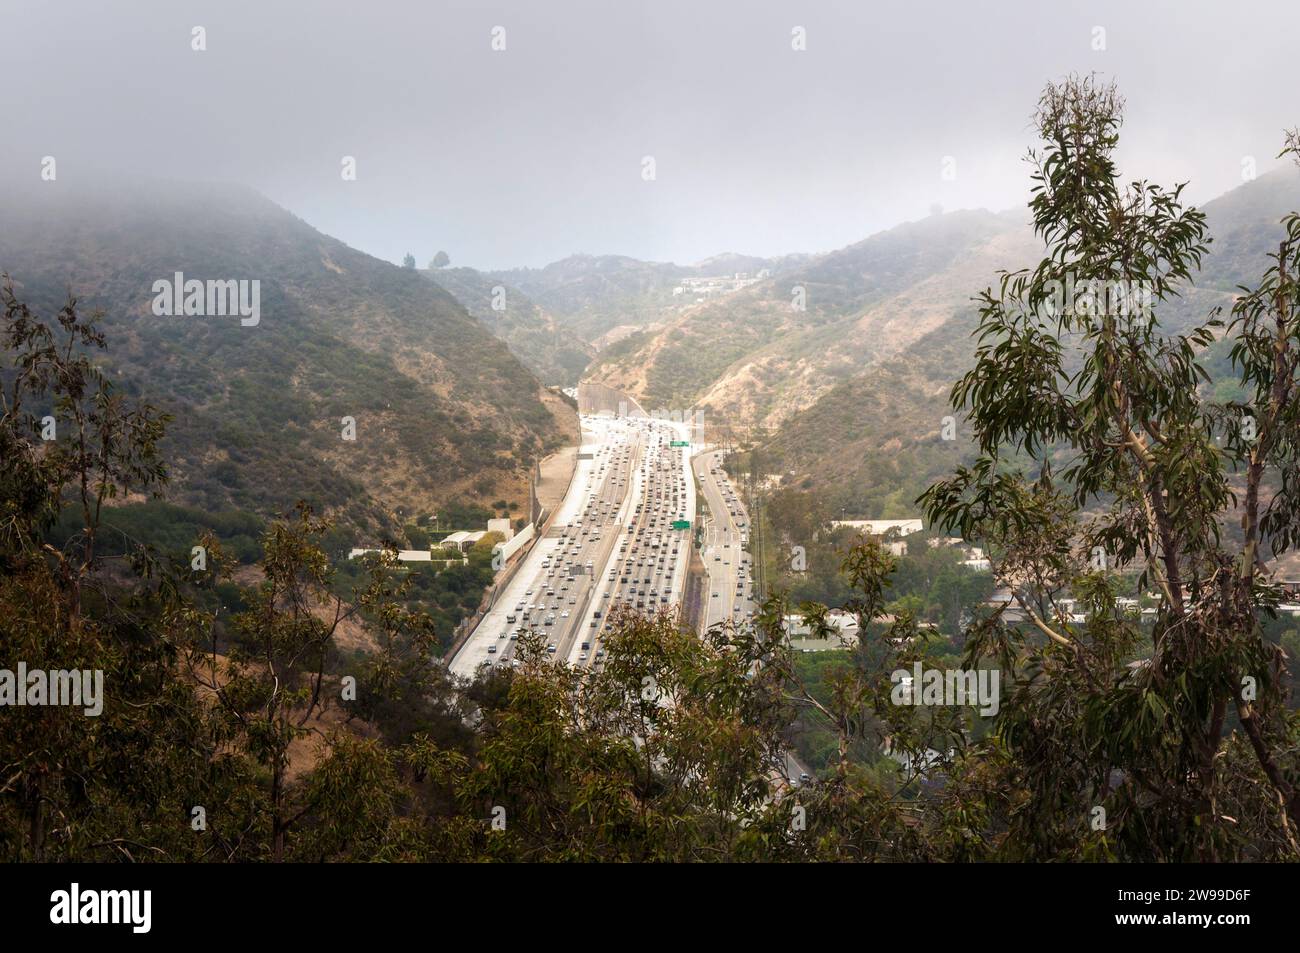 Interstate 405 Freeway near Brentwood, Los Angeles, California, aerial view Stock Photo